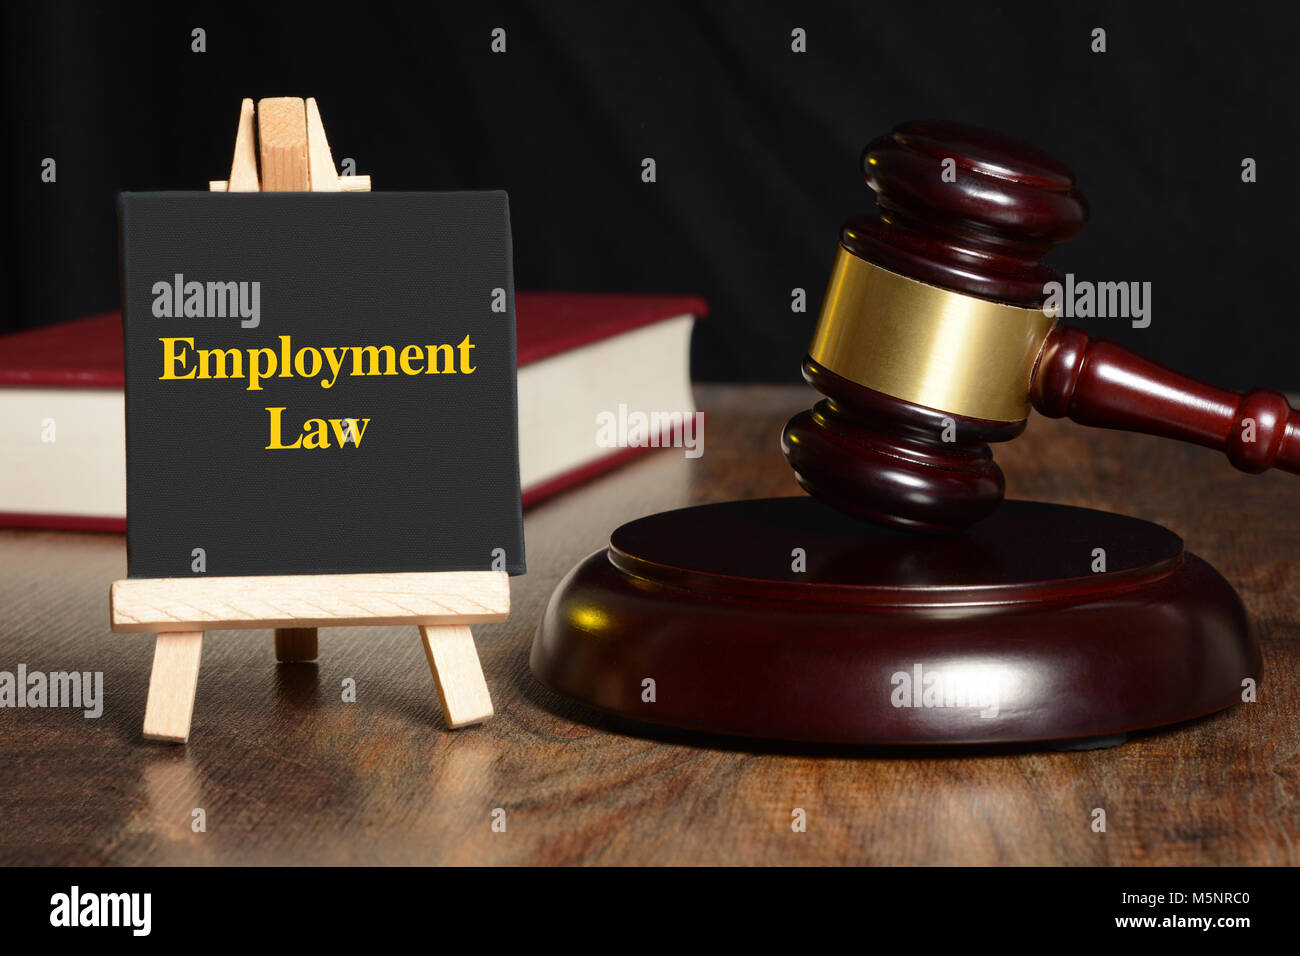 Employment Law sign with gavel and red book Stock Photo